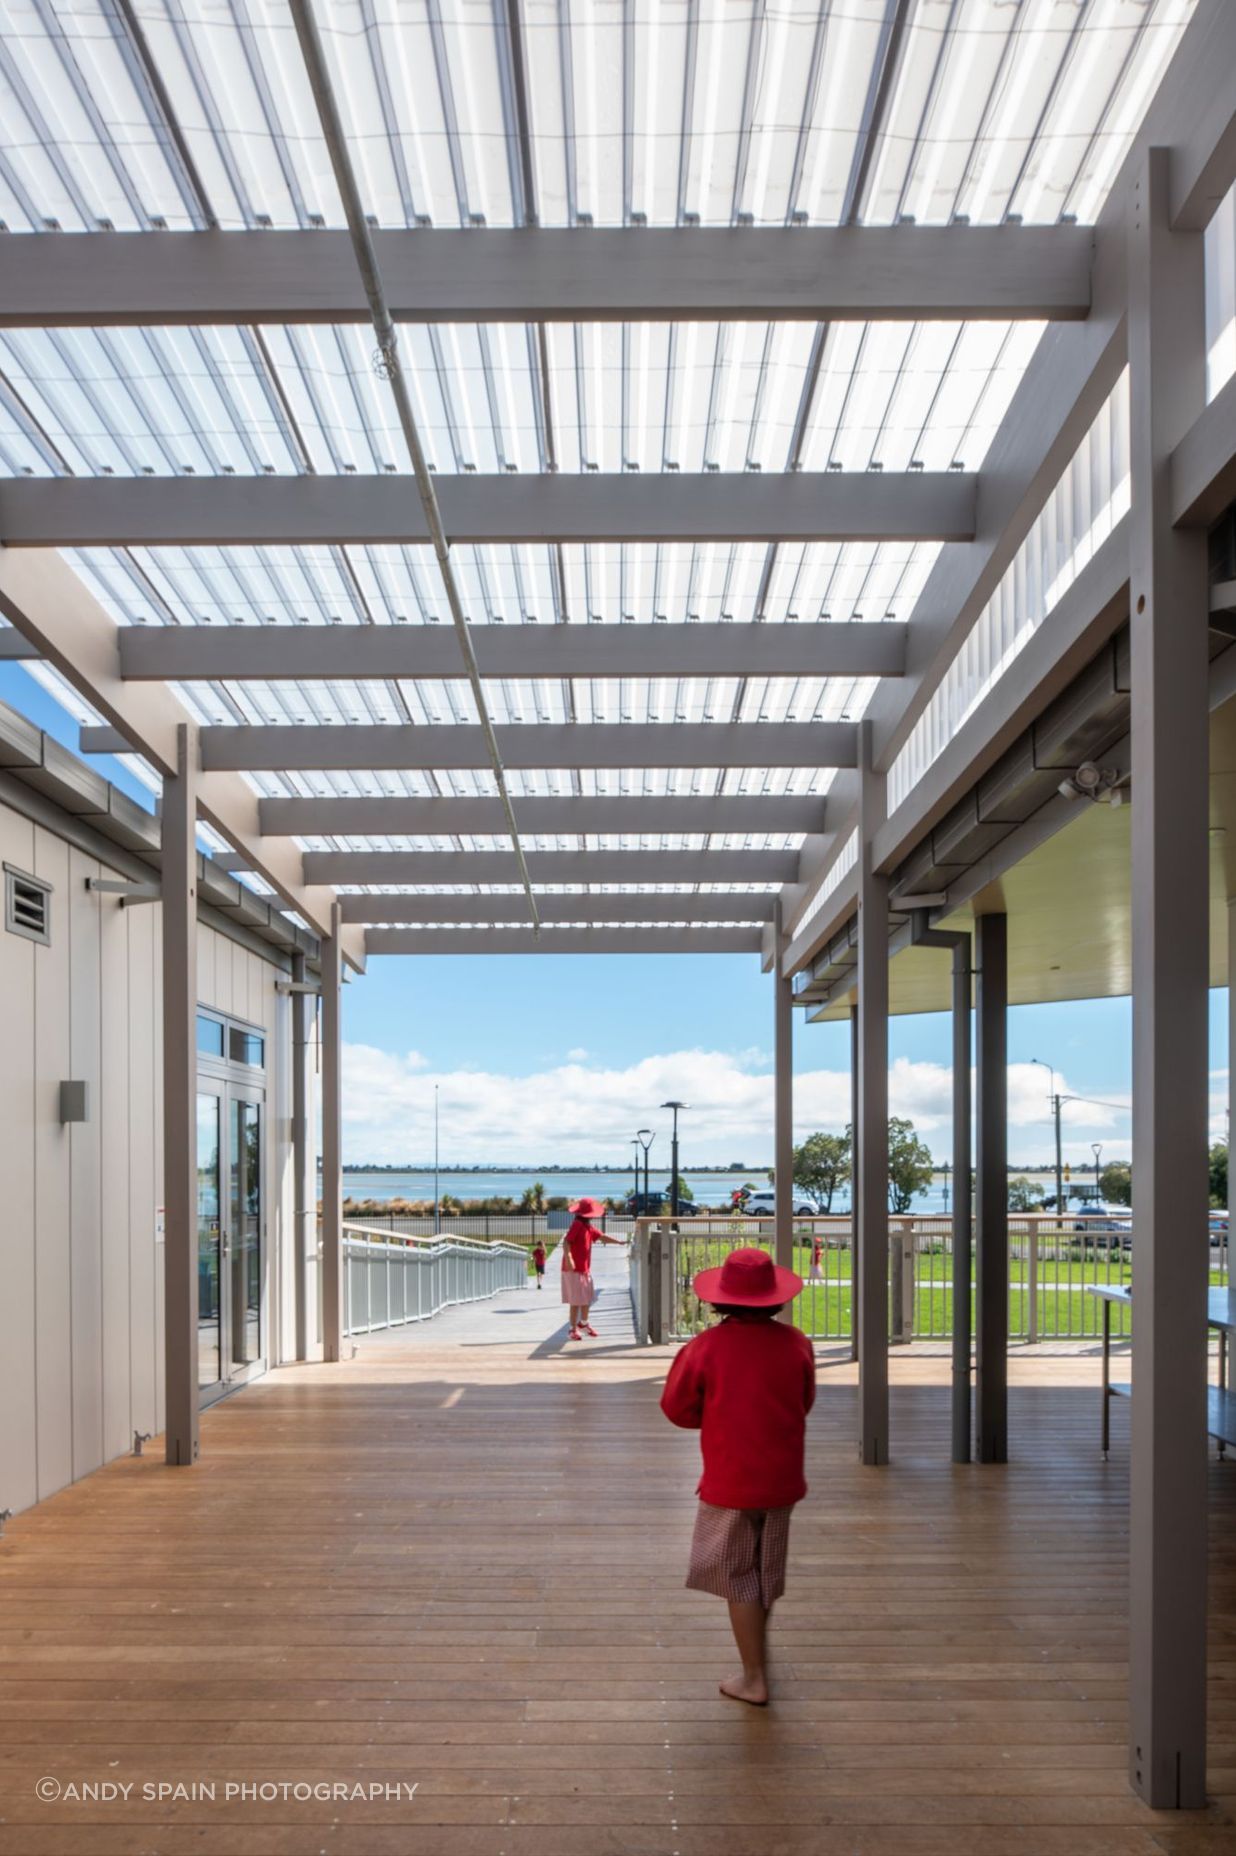 Timber canopies link buildings together, providing shelter and allowing for natural ventilation and open-space corridors.